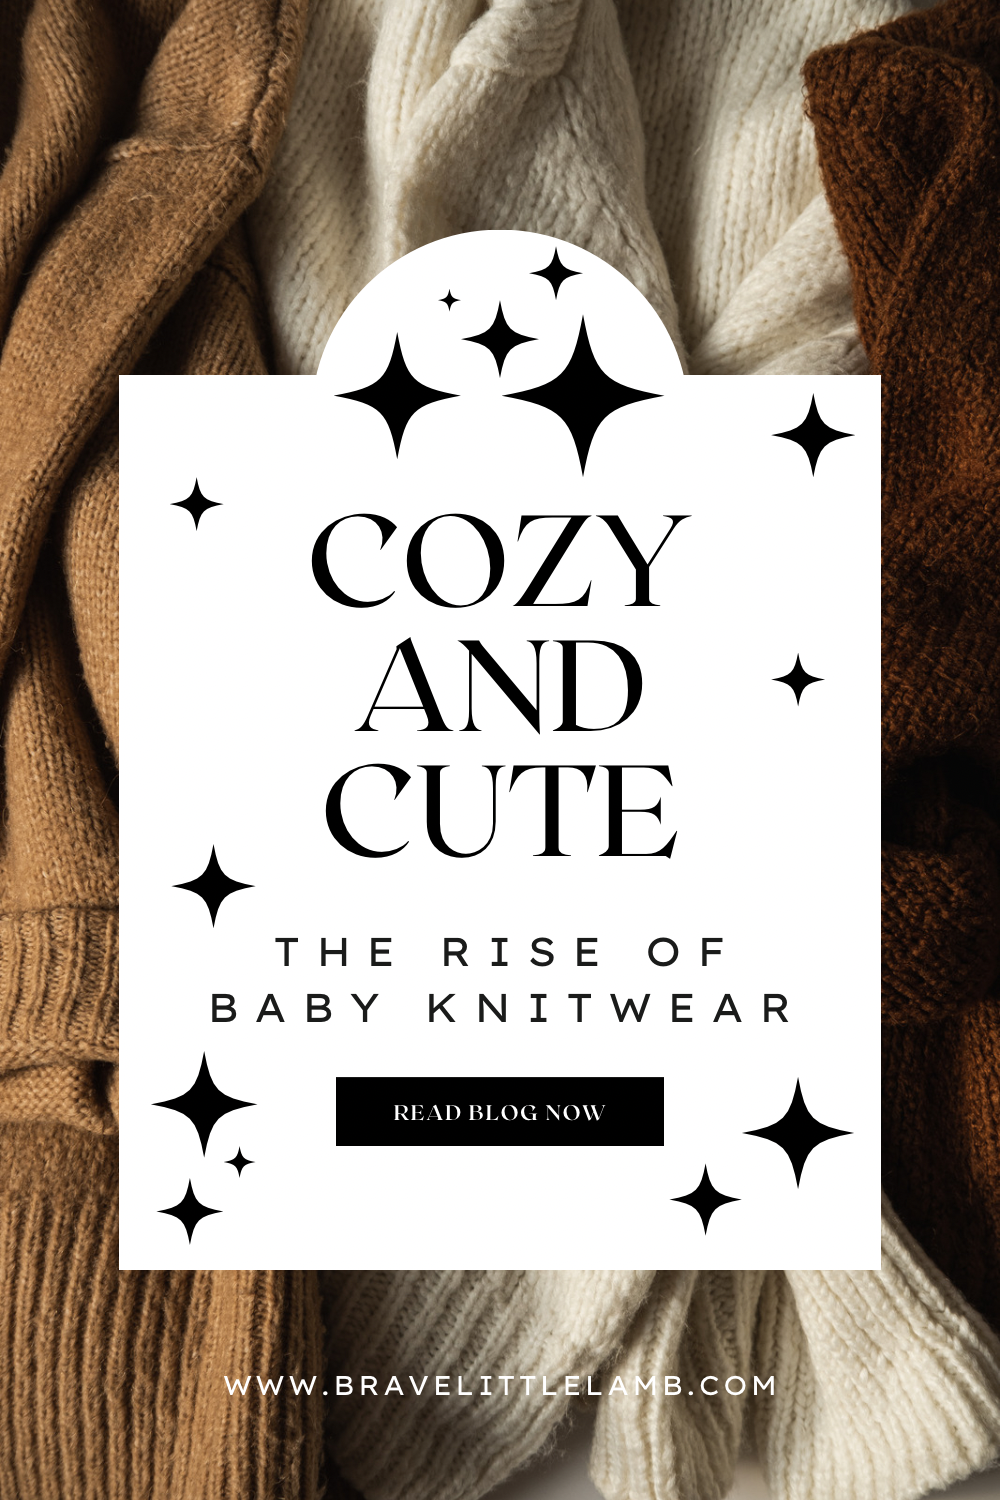 Cozy and Cute: The Rise of Baby Knitwear